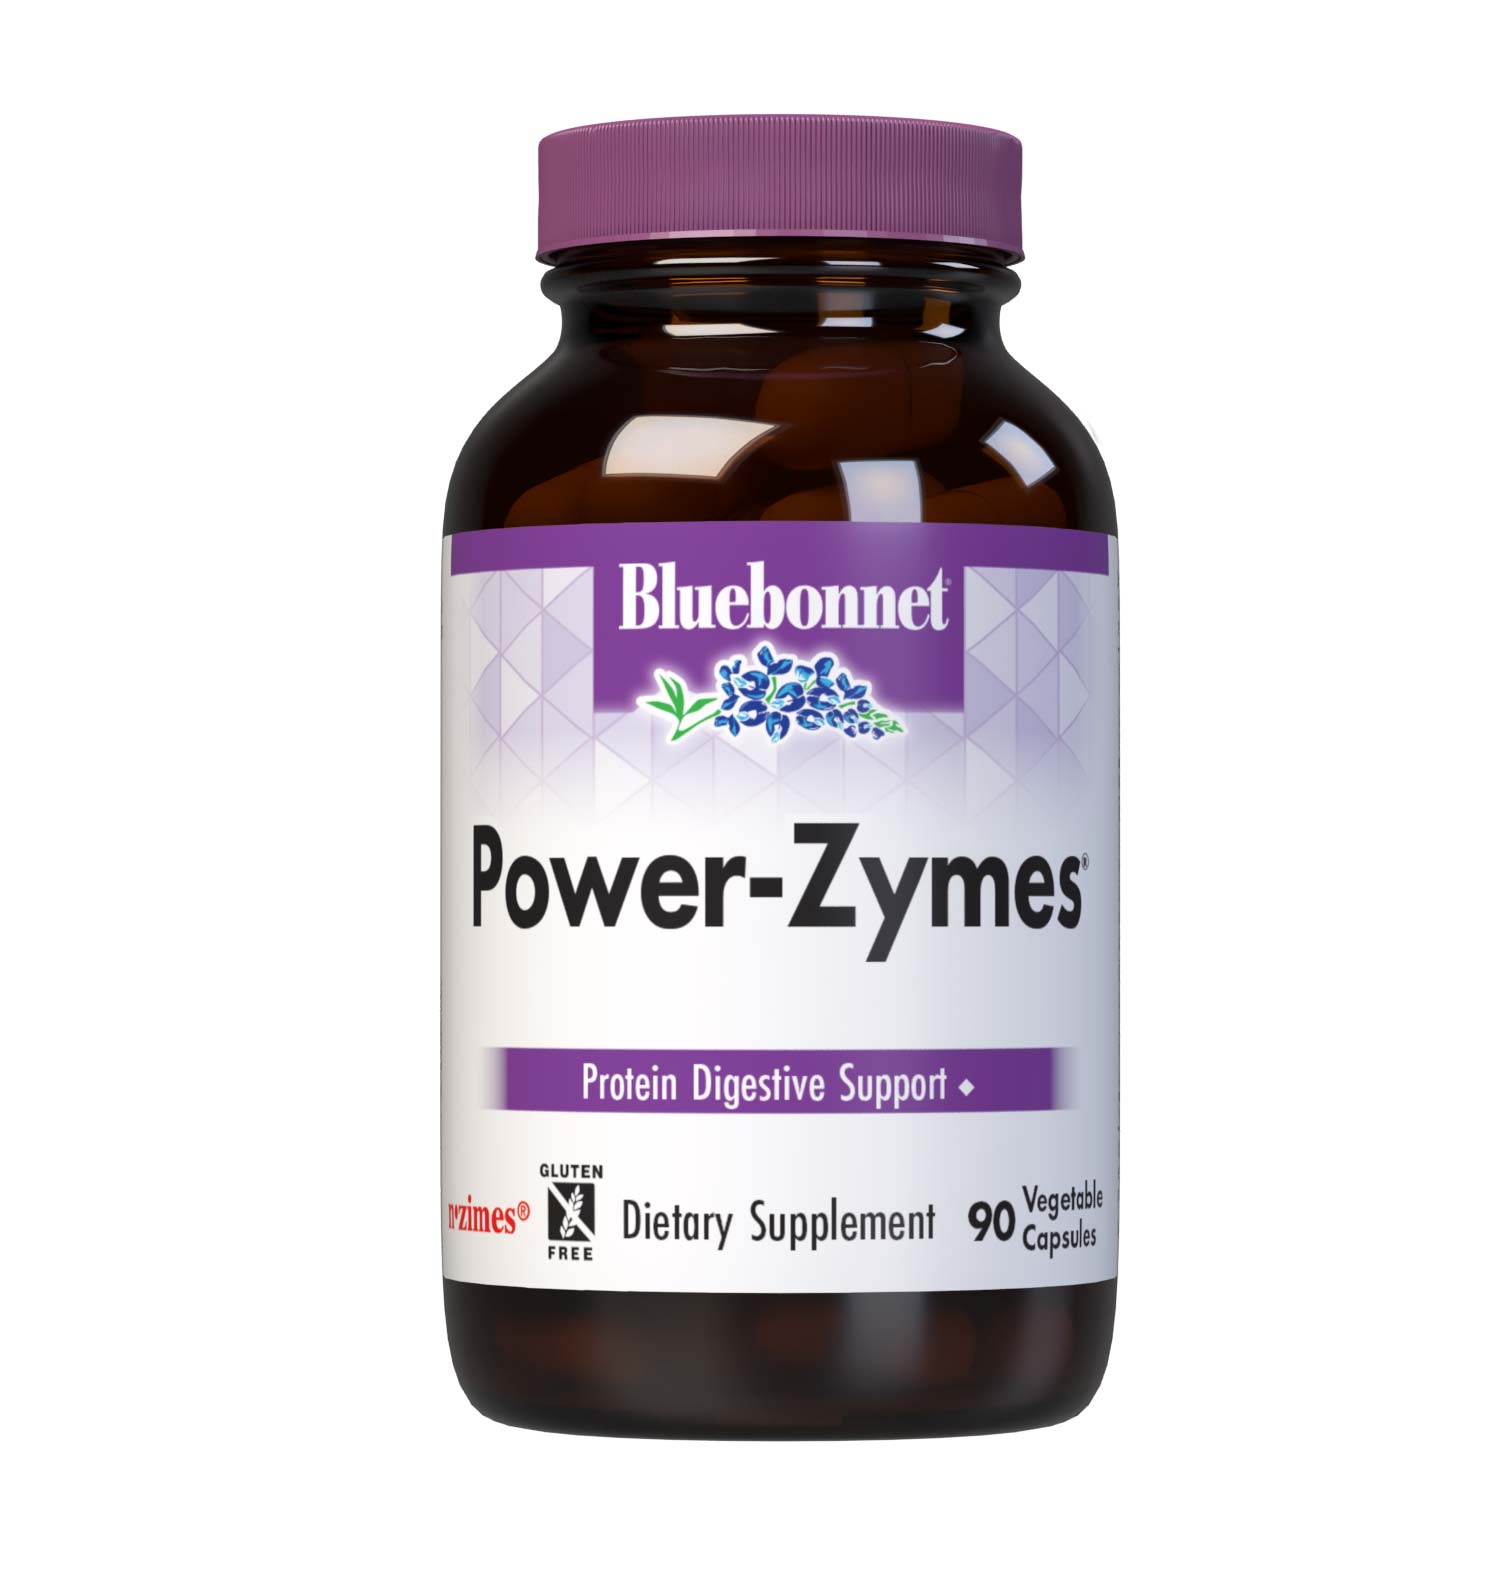 Bluebonnet’s Power-Zymes 90 Vegetable Capsules are formulated with digestive enzymes to help break down of a diet high in protein with some carbohydrates and fats. Each capsule also delivers ginger and peppermint to help soothe digestion. #size_90 count